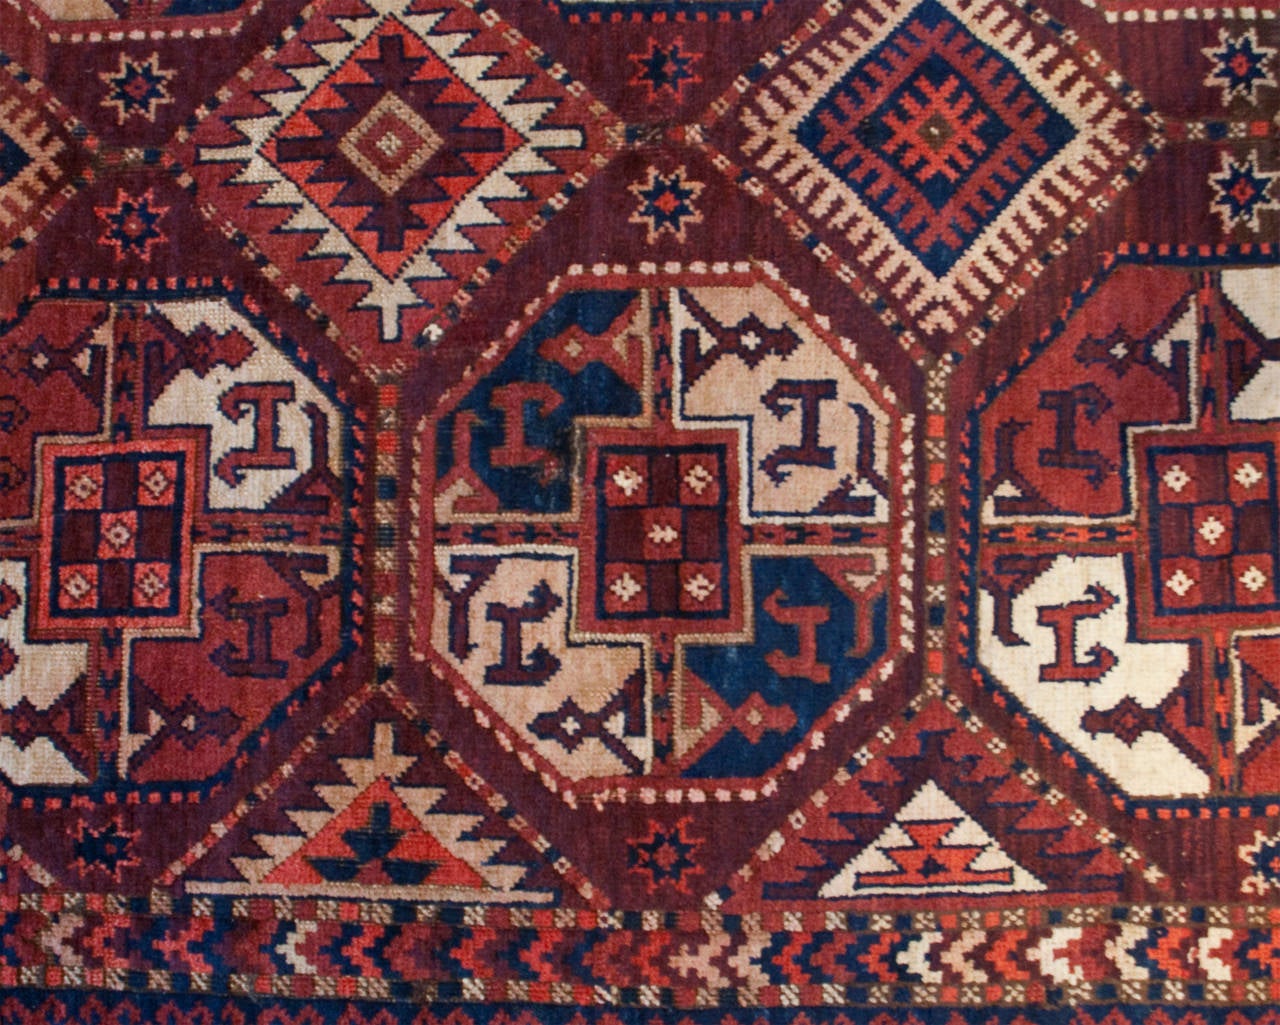 An early 20th century Central Asian Turkmen rug with multiple octagonal medallions amidst a field of geometric patterns, surrounded by multiple complementary geometric borders.